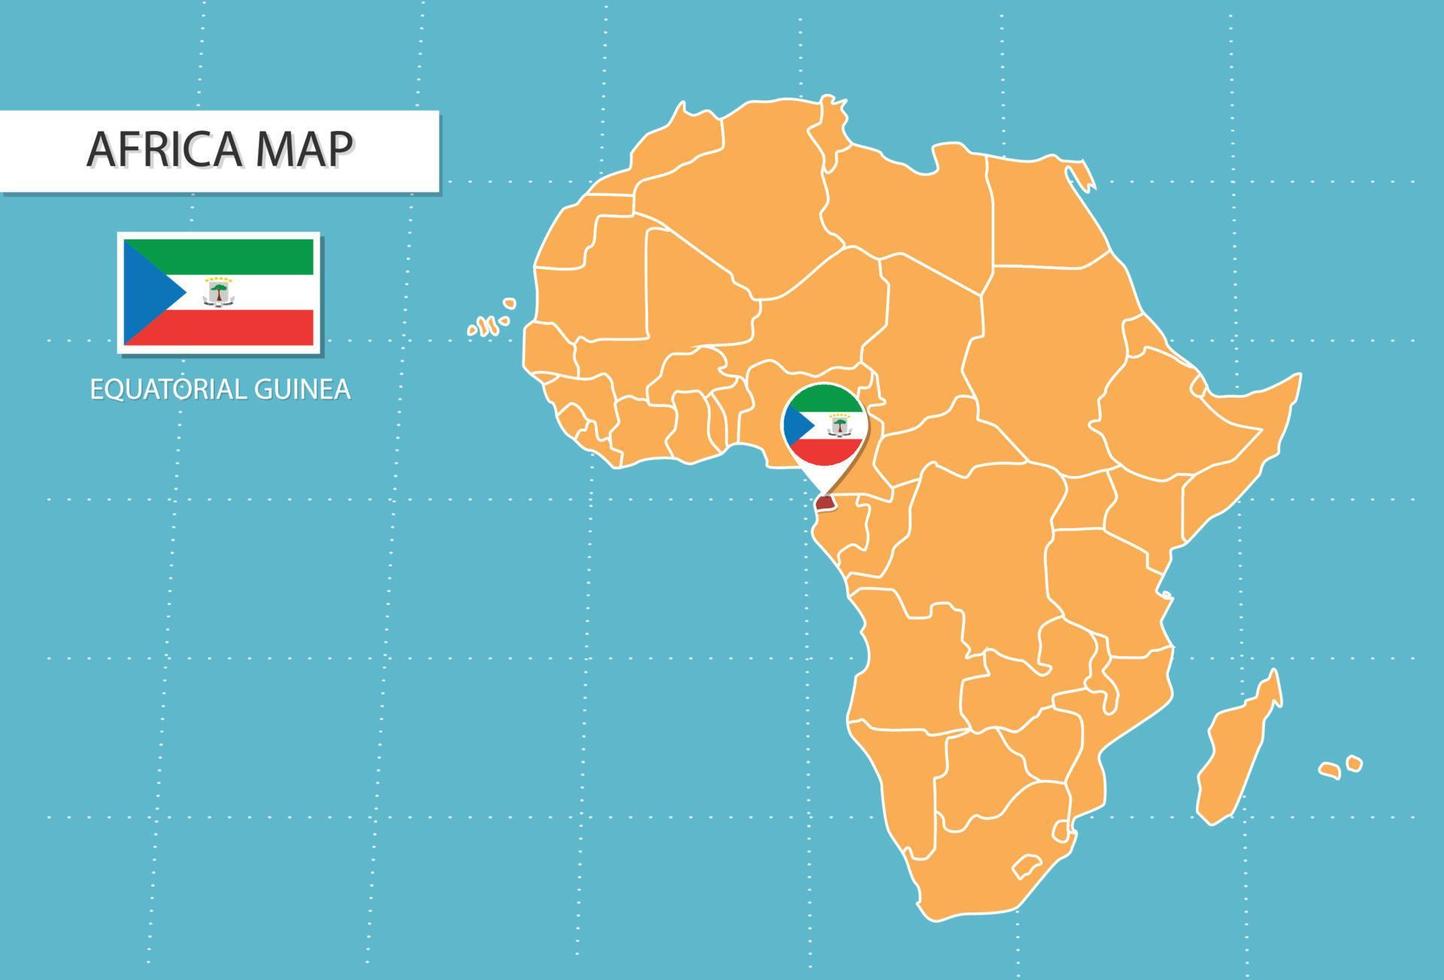 Equatorial Guinea map in Africa, icons showing Equatorial Guinea location and flags. vector